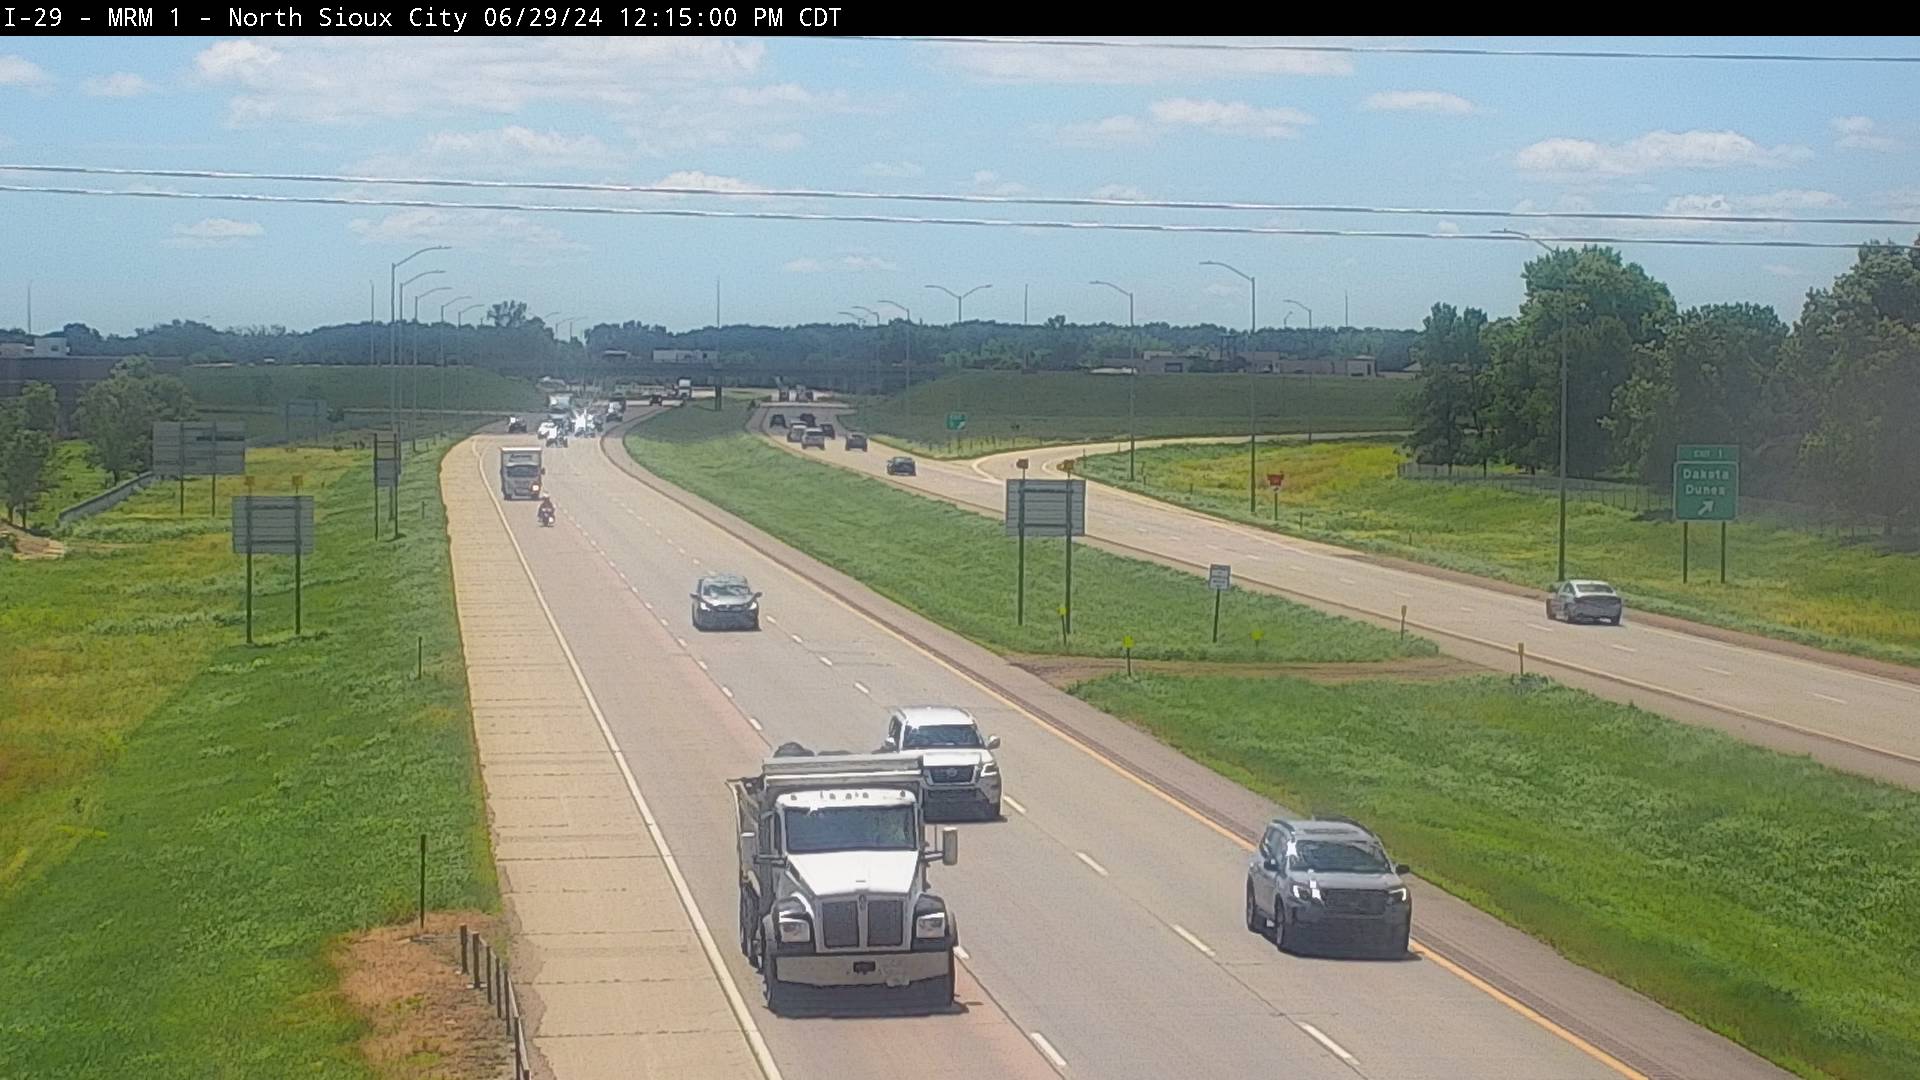 Traffic Cam 2 miles north of town along I-29 @ MP 2 - South Player